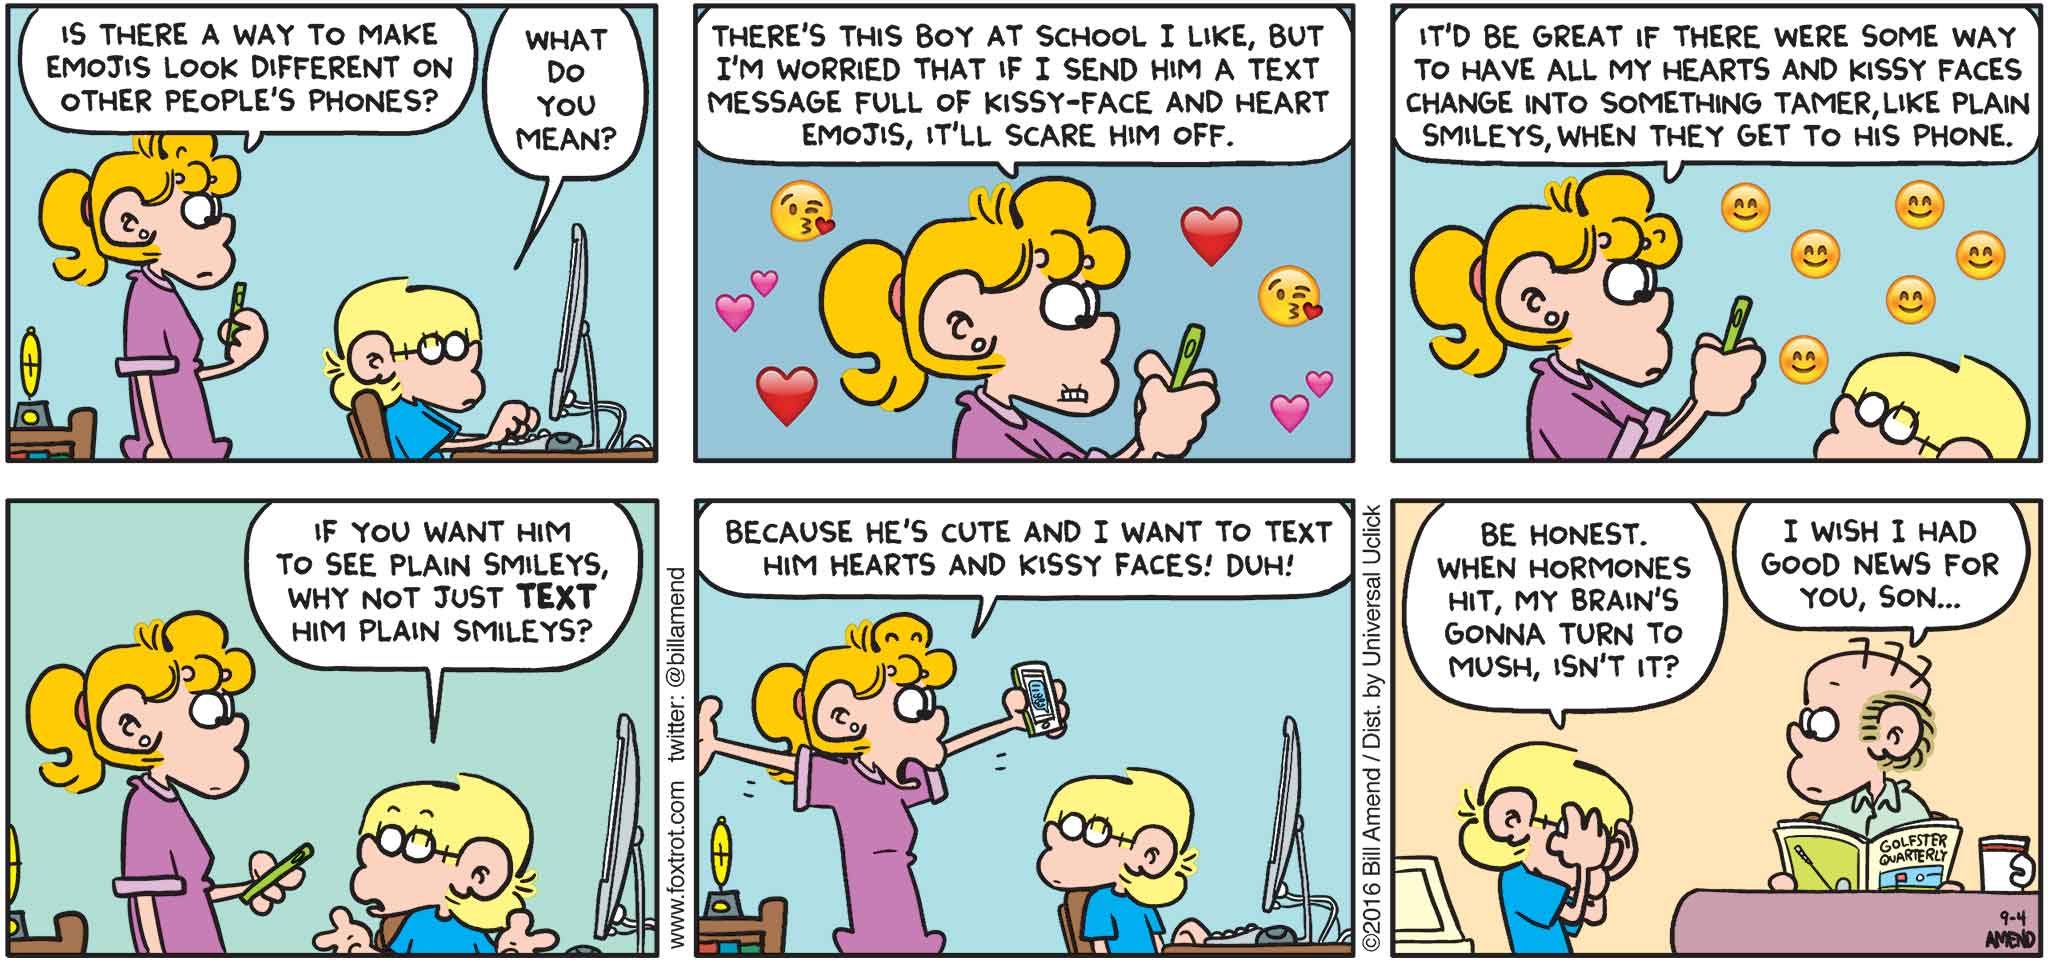 FoxTrot by Bill Amend - "Emushies" published September 4, 2016 - Paige: Is there a way to make emojis look different on other people's phones? Jason: What do you mean? Paige: There's this boy at school I like, but I'm worried that if I send him a text message full of kissy-face and heart emojis, it'll scare him off. It'd be great if there were some way to have all my hearts and kissy faces change into something tamer, like plain smileys, when they get to his phone. Jason: If you want him to see plain smileys, why not just text him plain smileys? Paige: Because he's cute and I want to text him hearts and kissy faces! Duh! Jason: Be honest. When hormones hit, my brain's gonna turn to mush, isn't it? Roger: I wish I had good news for you, son...